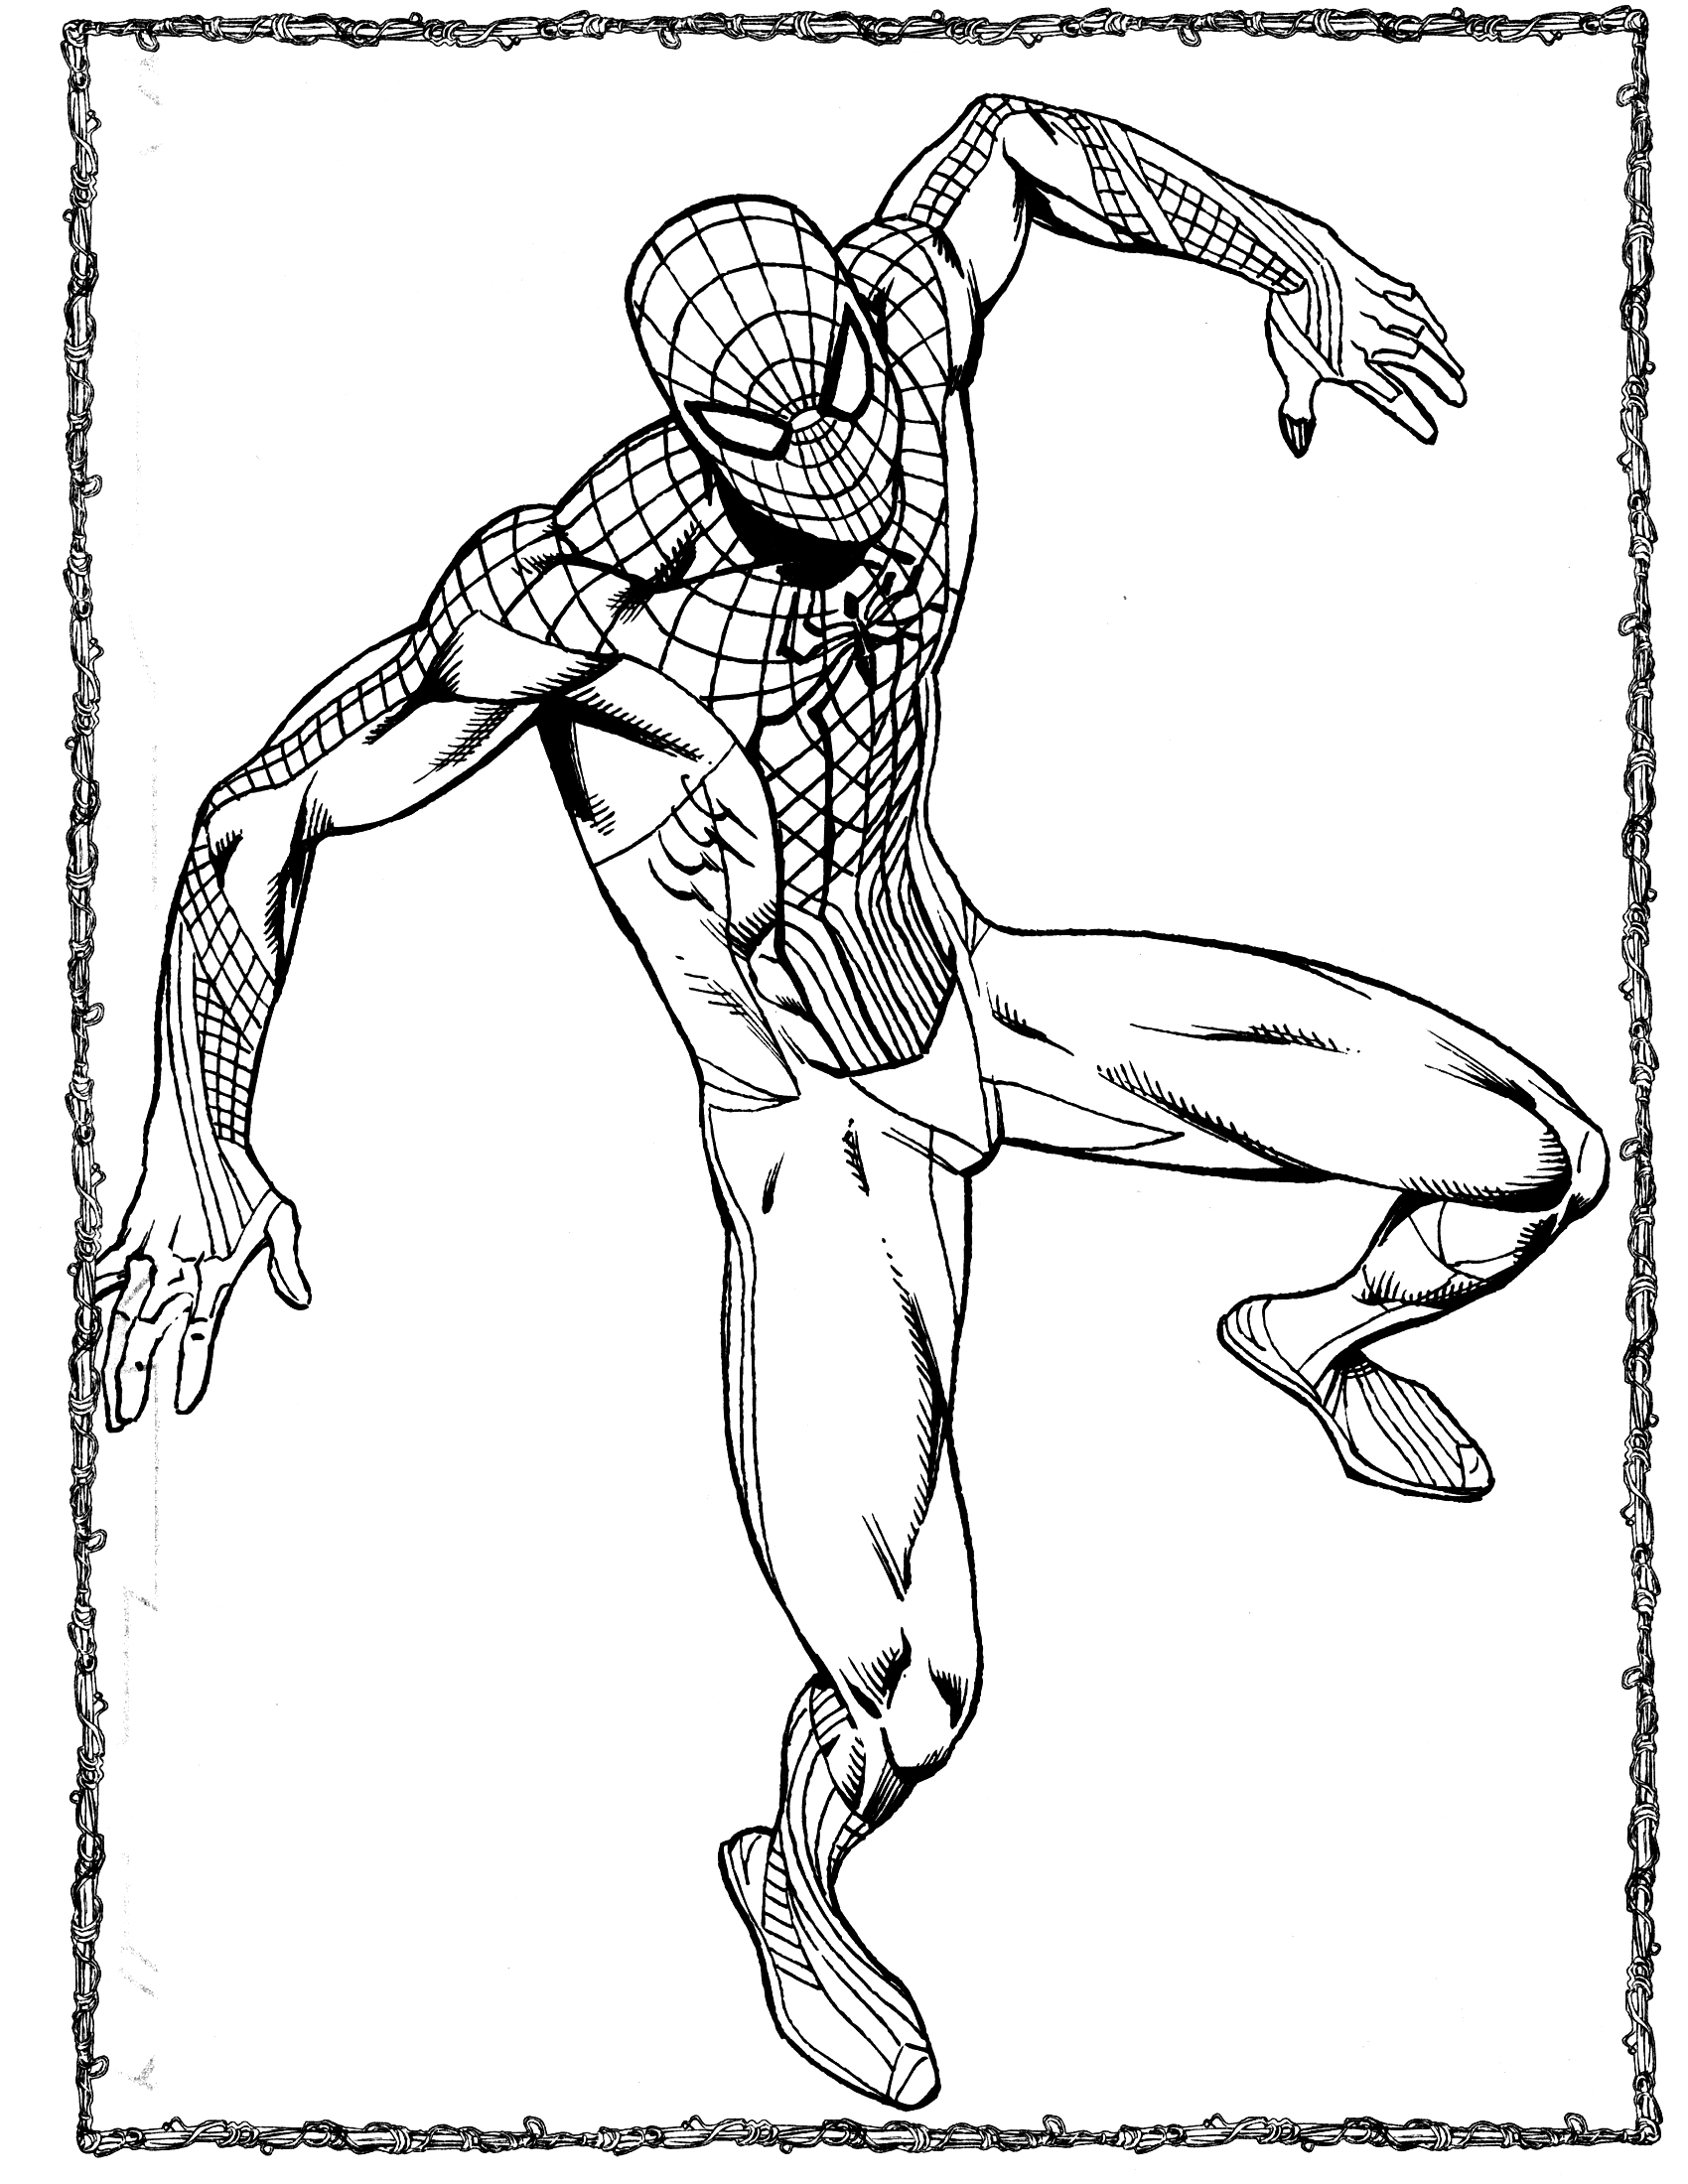 Amazing Spider Man Coloring Pages At Getcolorings Com - vrogue.co